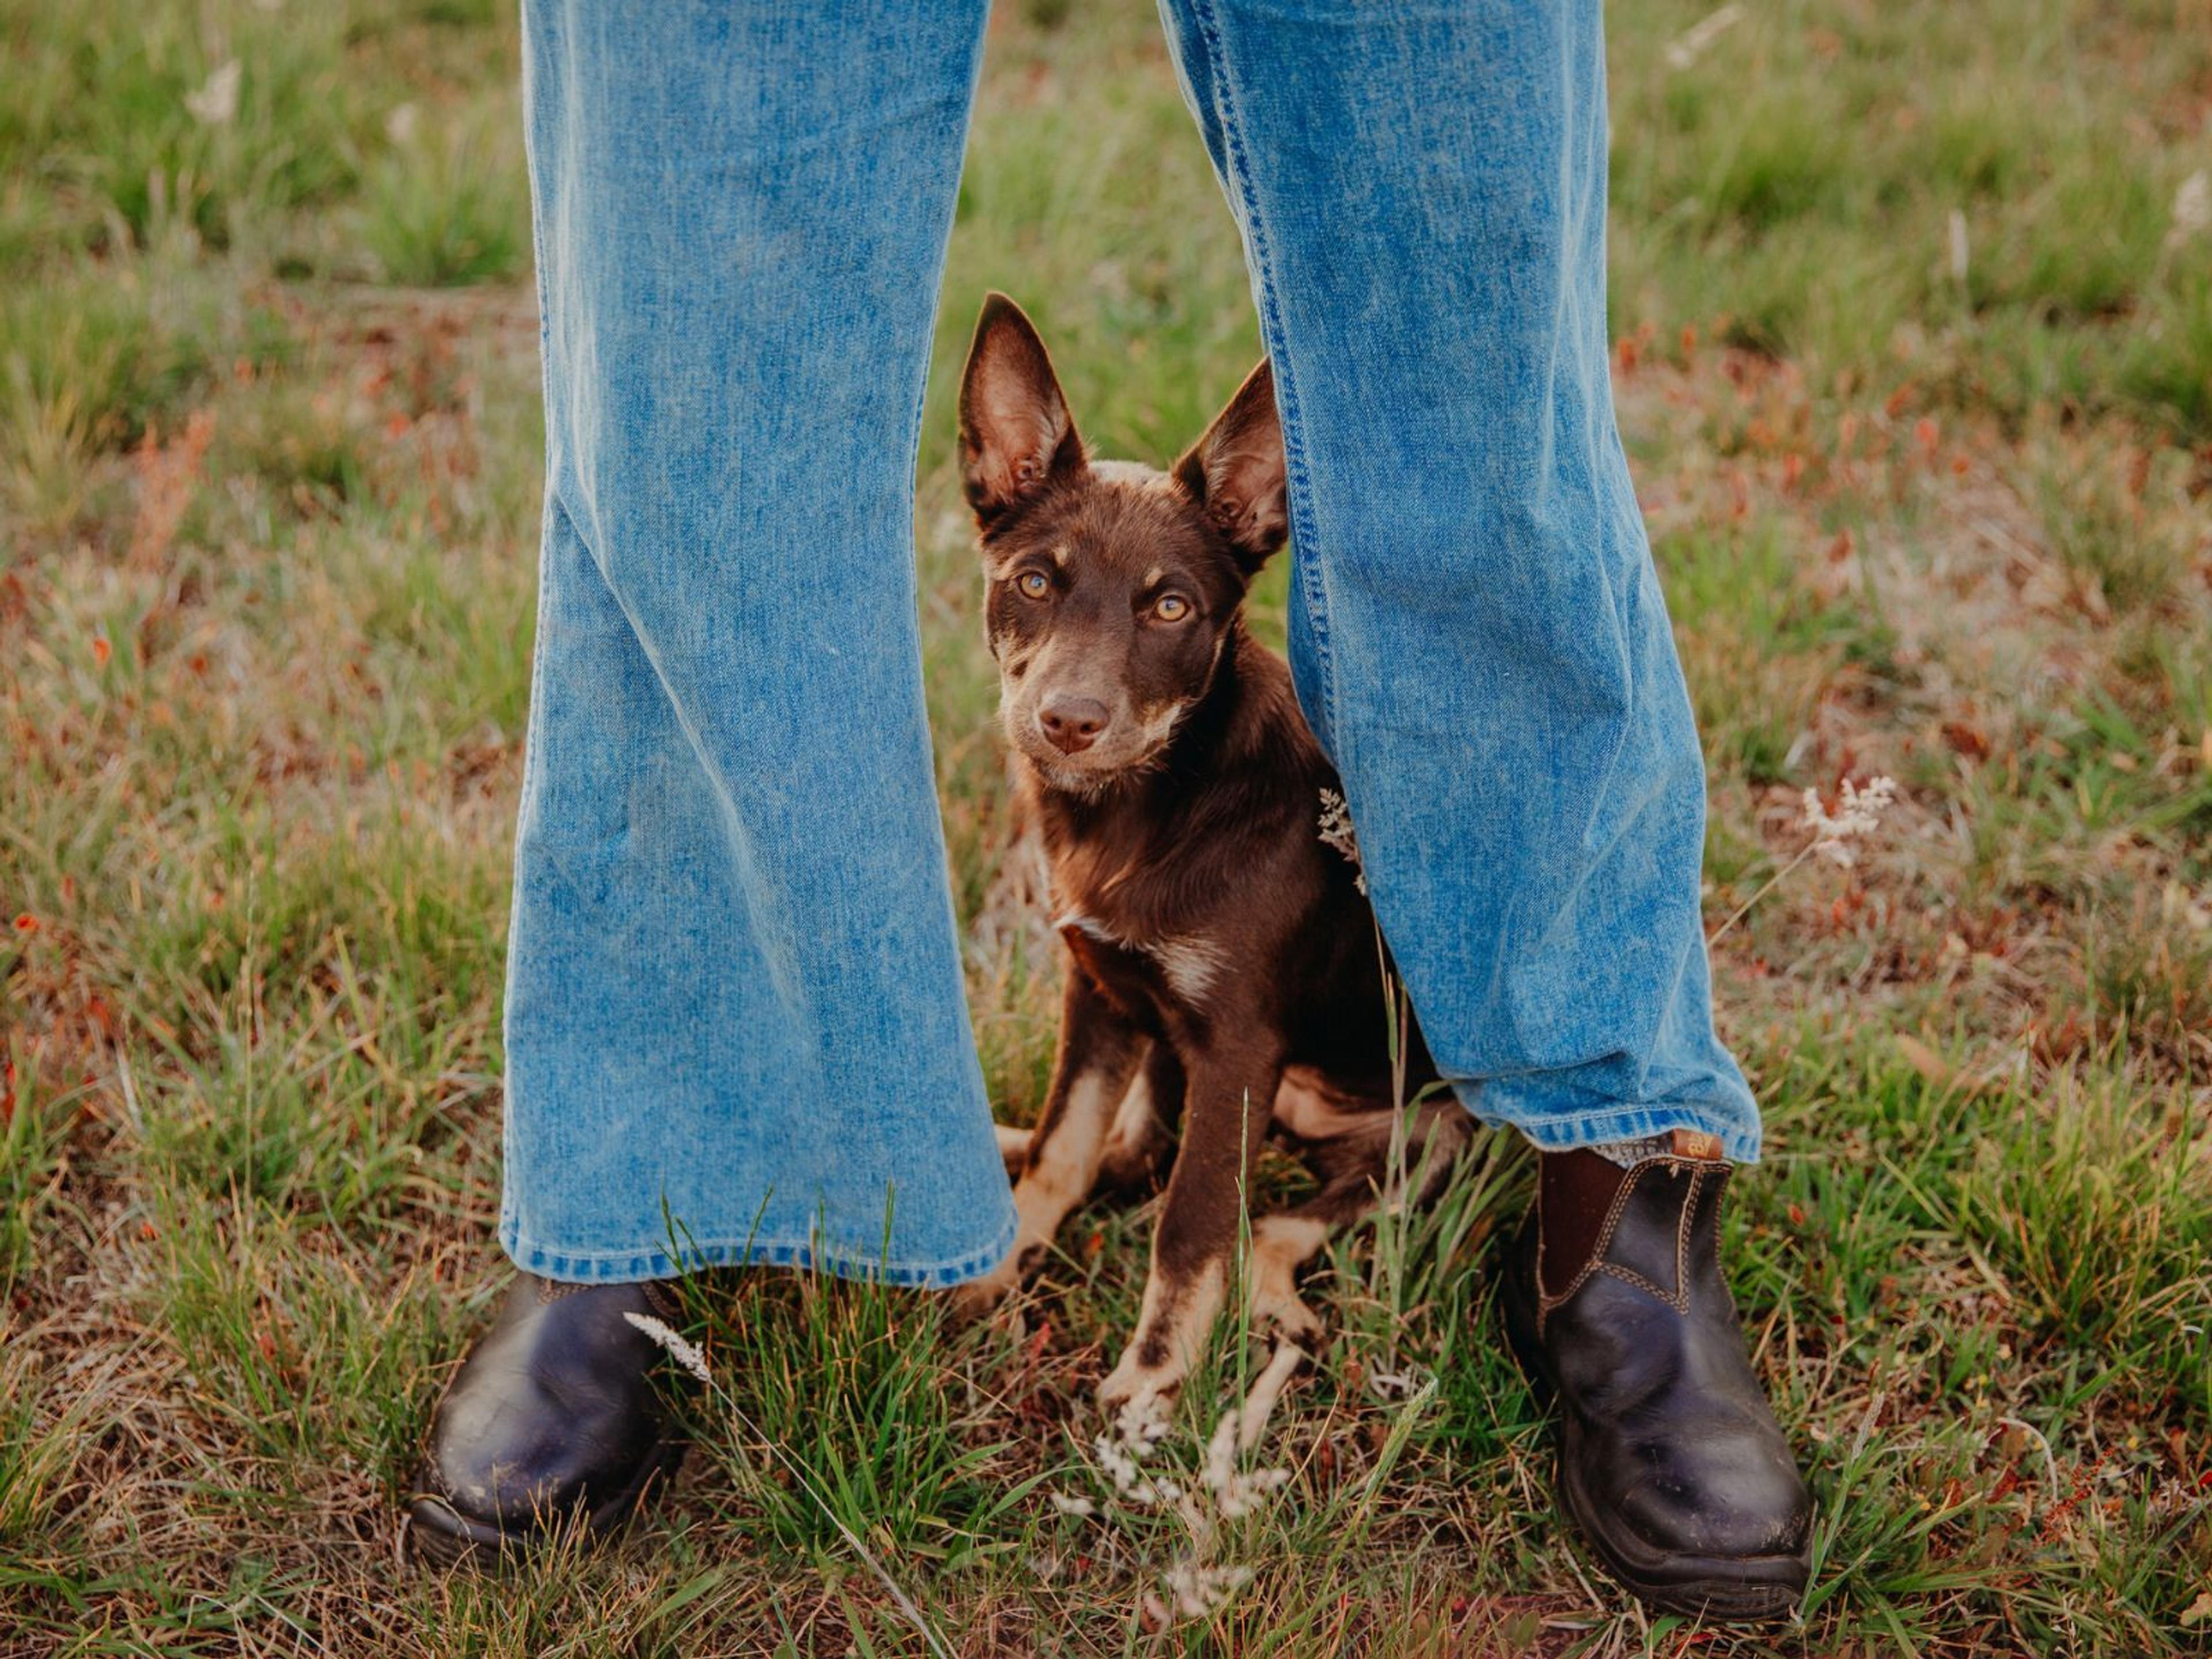 A brown kelpie looking out from between a person's jeans. They are in a grassy area.